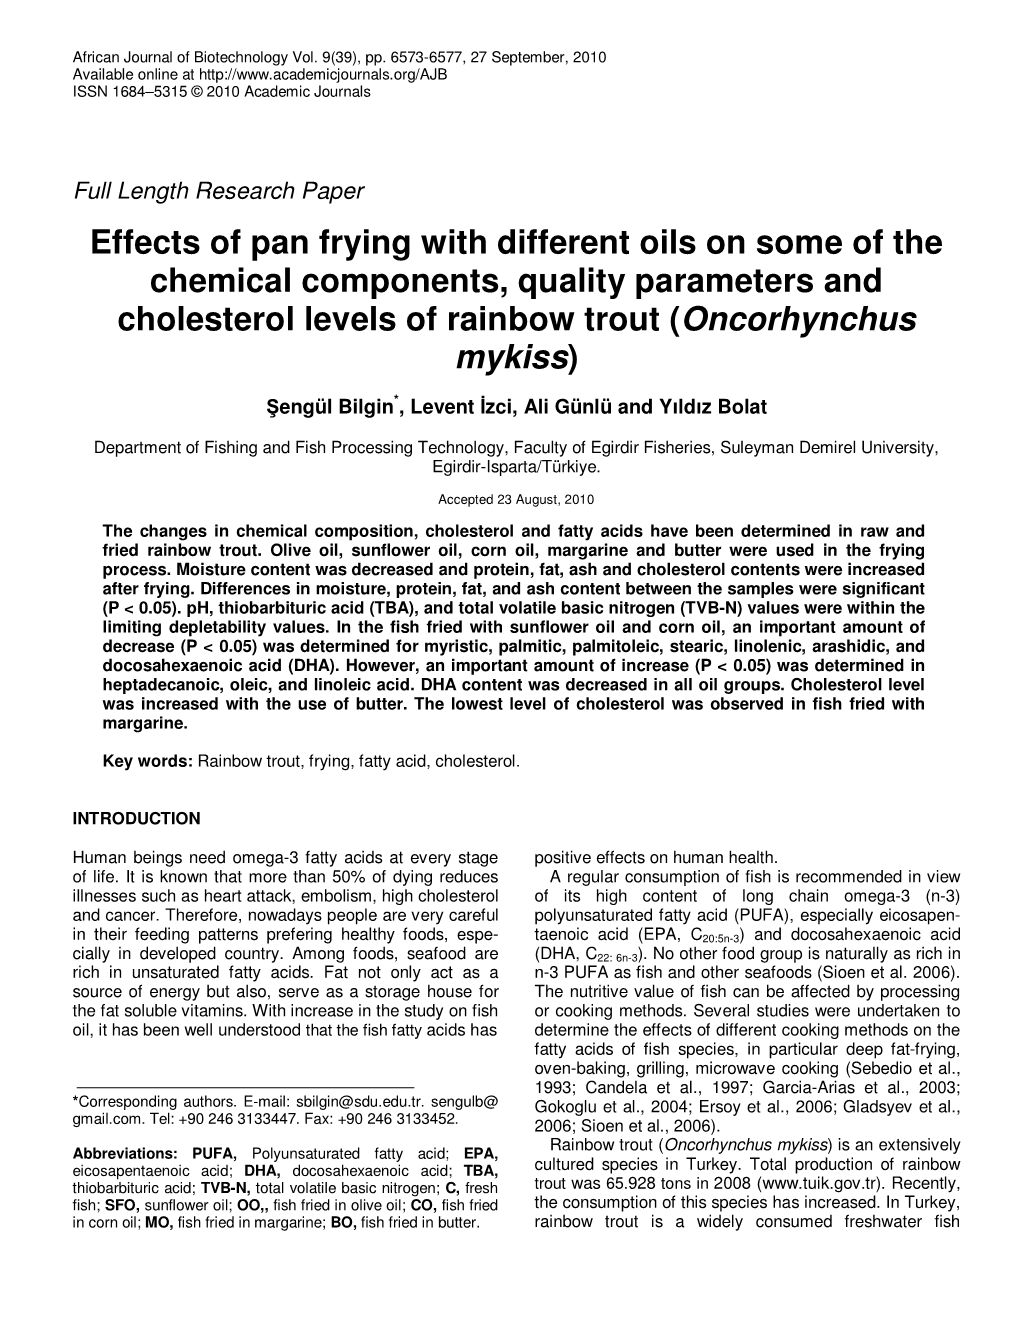 Effects of Pan Frying with Different Oils on Some of the Chemical Components, Quality Parameters and Cholesterol Levels of Rainbow Trout (Oncorhynchus Mykiss)